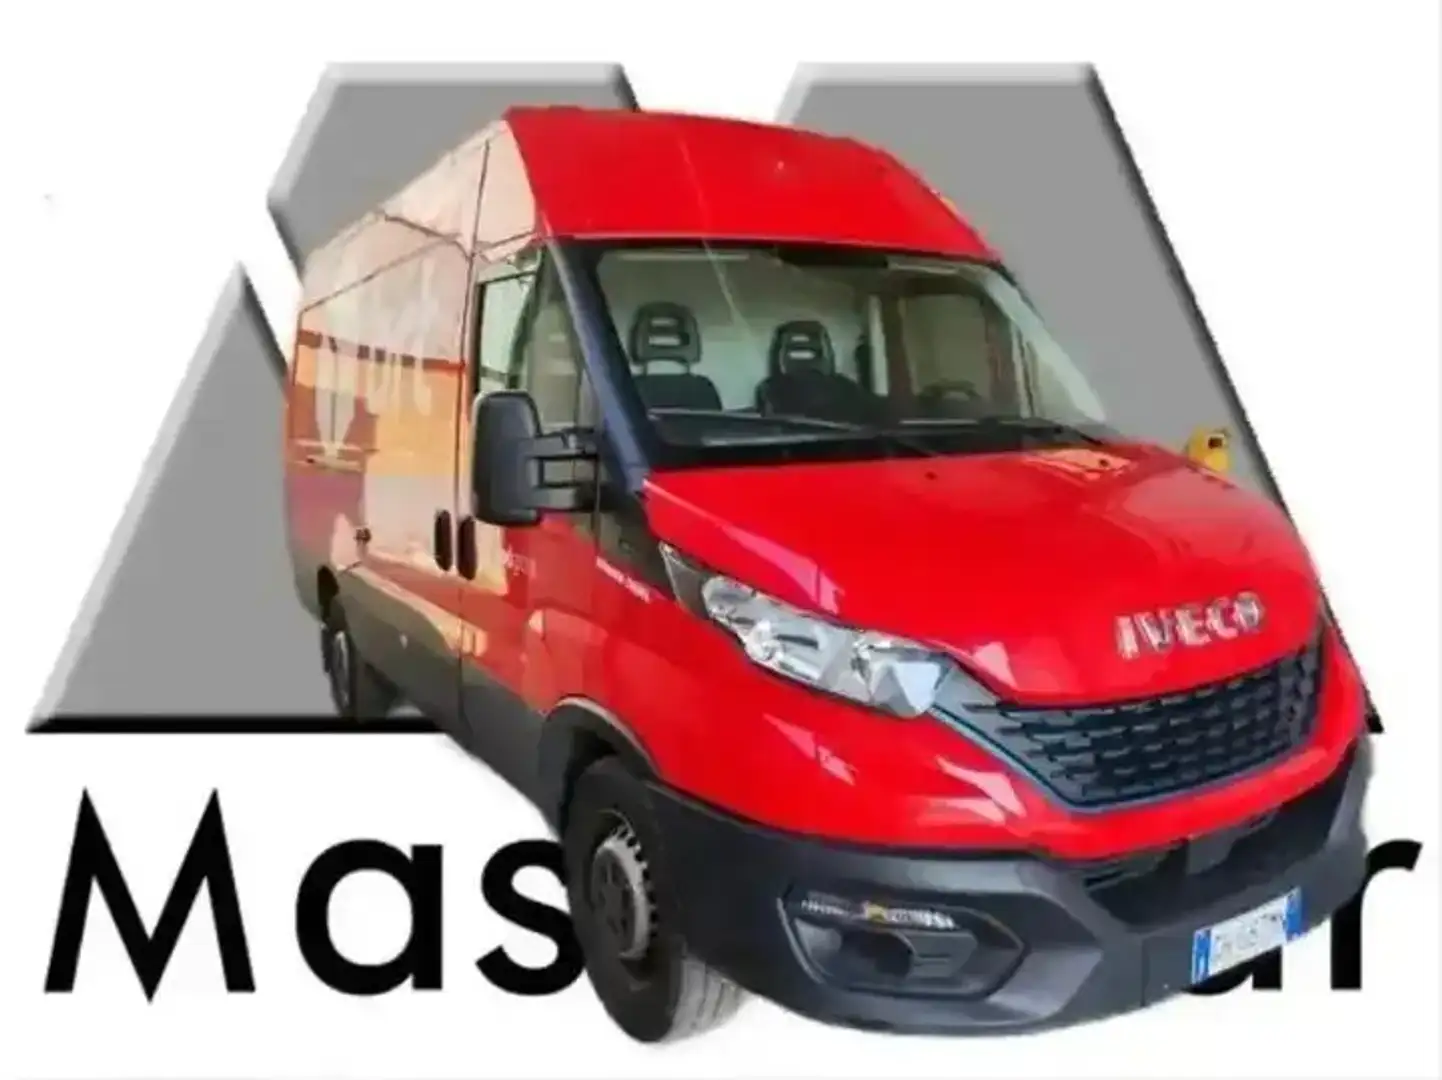 Iveco Daily 35S14NV 3.0 NATURAL POWER PM-SL-TM  TG : GH687MN Rot - 1